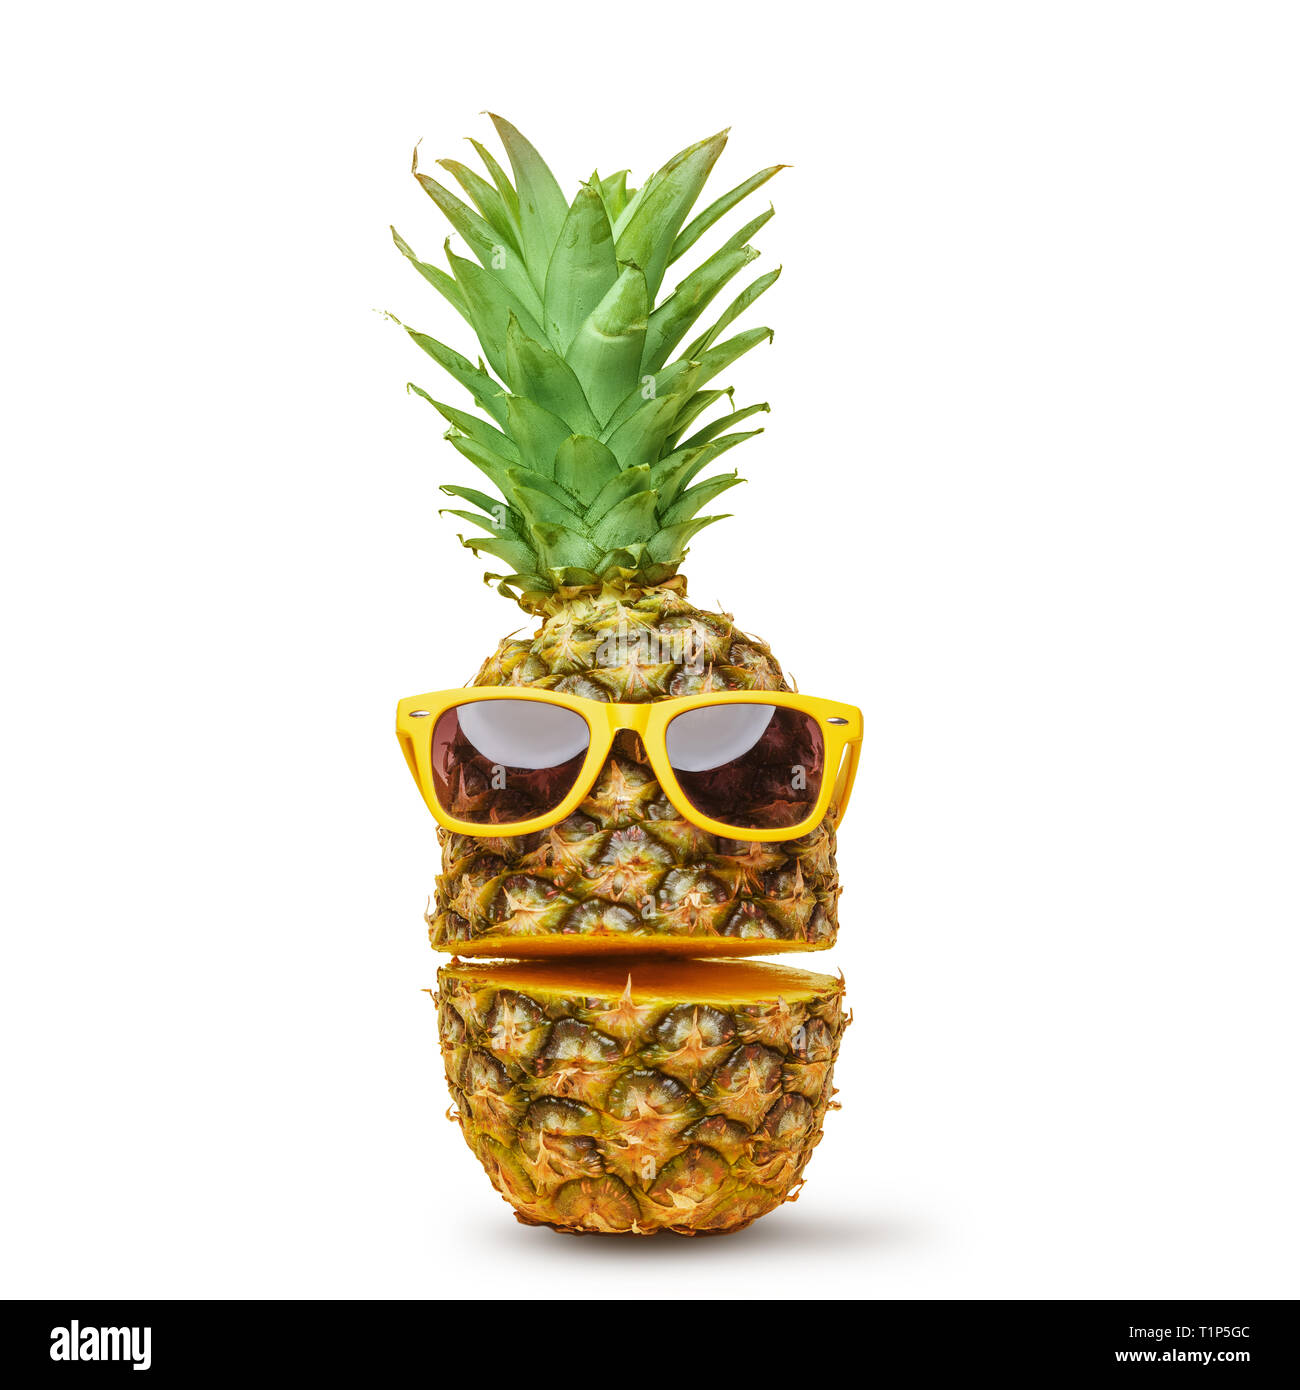 Juicy pineapple in sunglasses, cut into parts on a white background. Summer mood. Isolated. Stock Photo